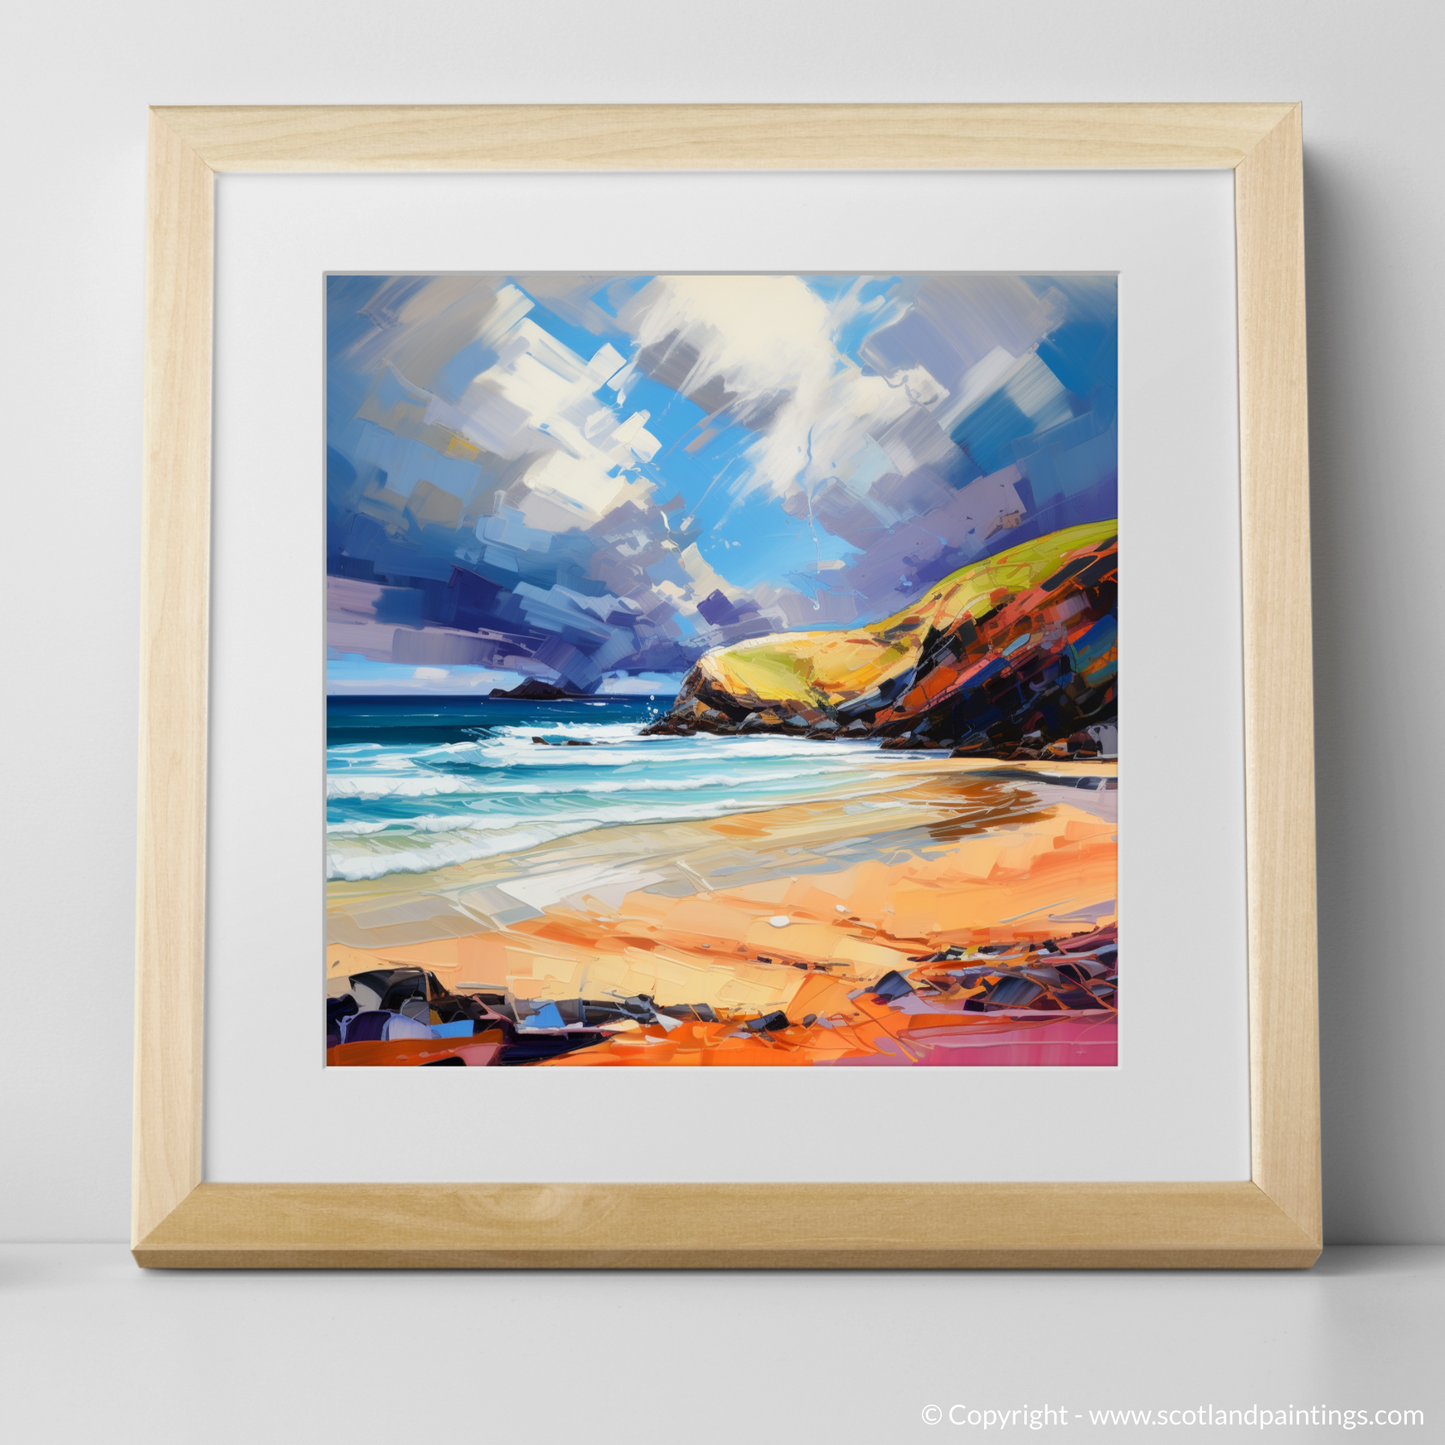 Art Print of Sandwood Bay with a stormy sky with a natural frame